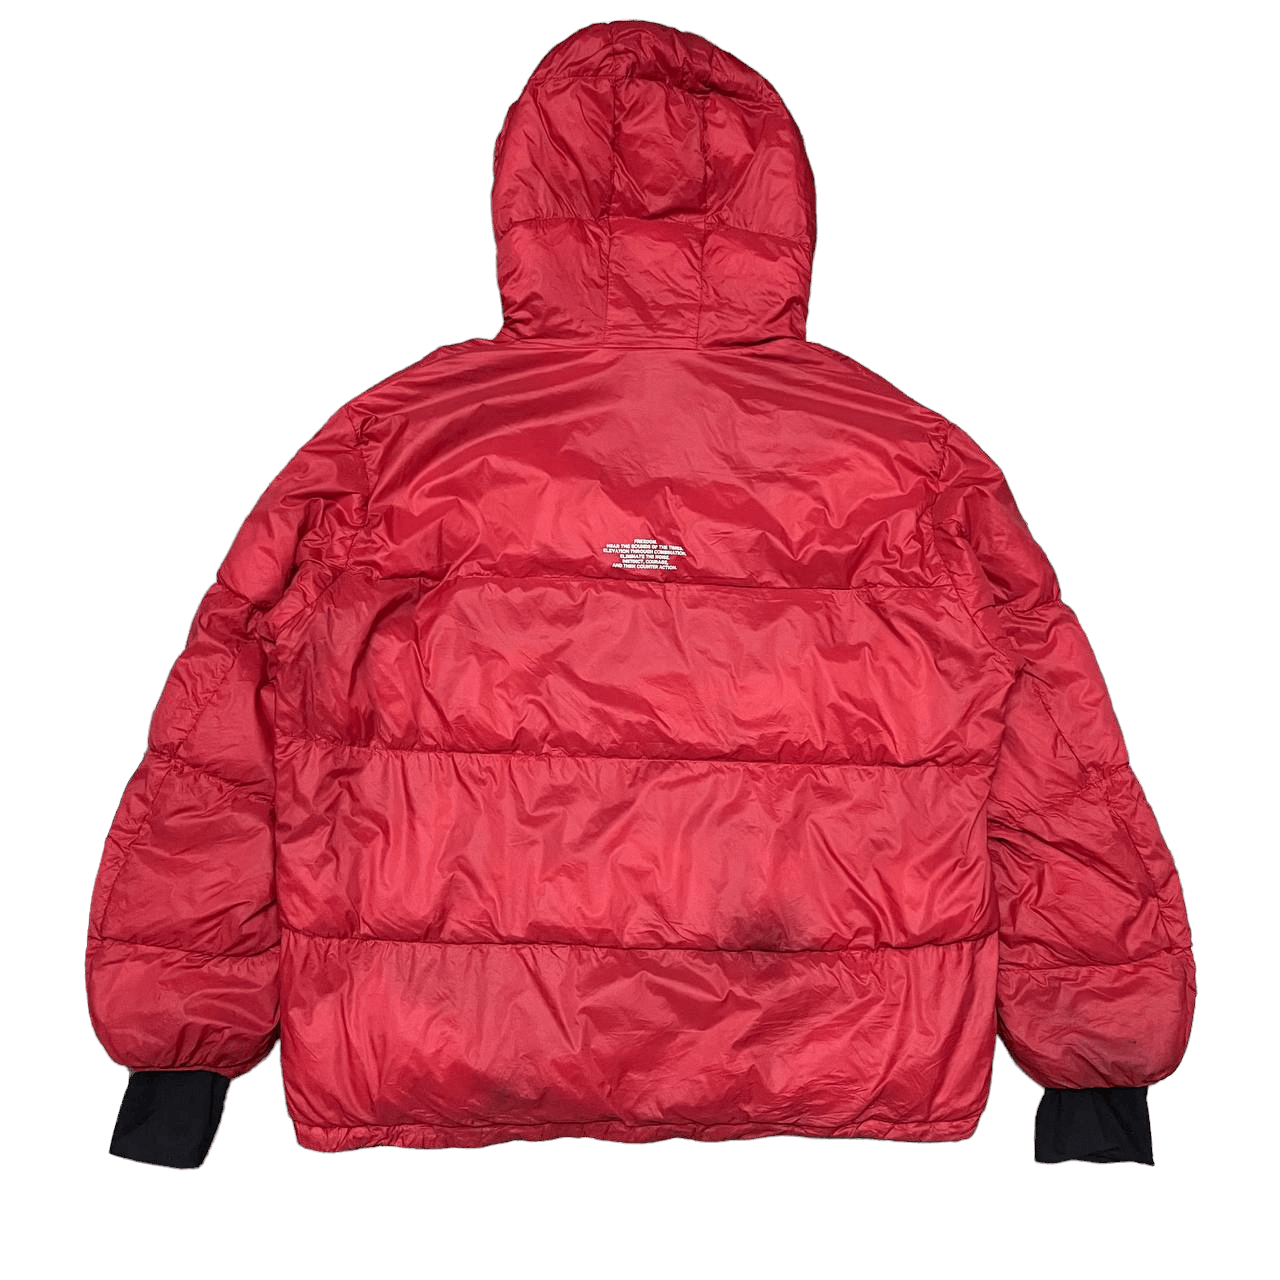 Undercover GU Padded Puffer Jacket Red XL - 16